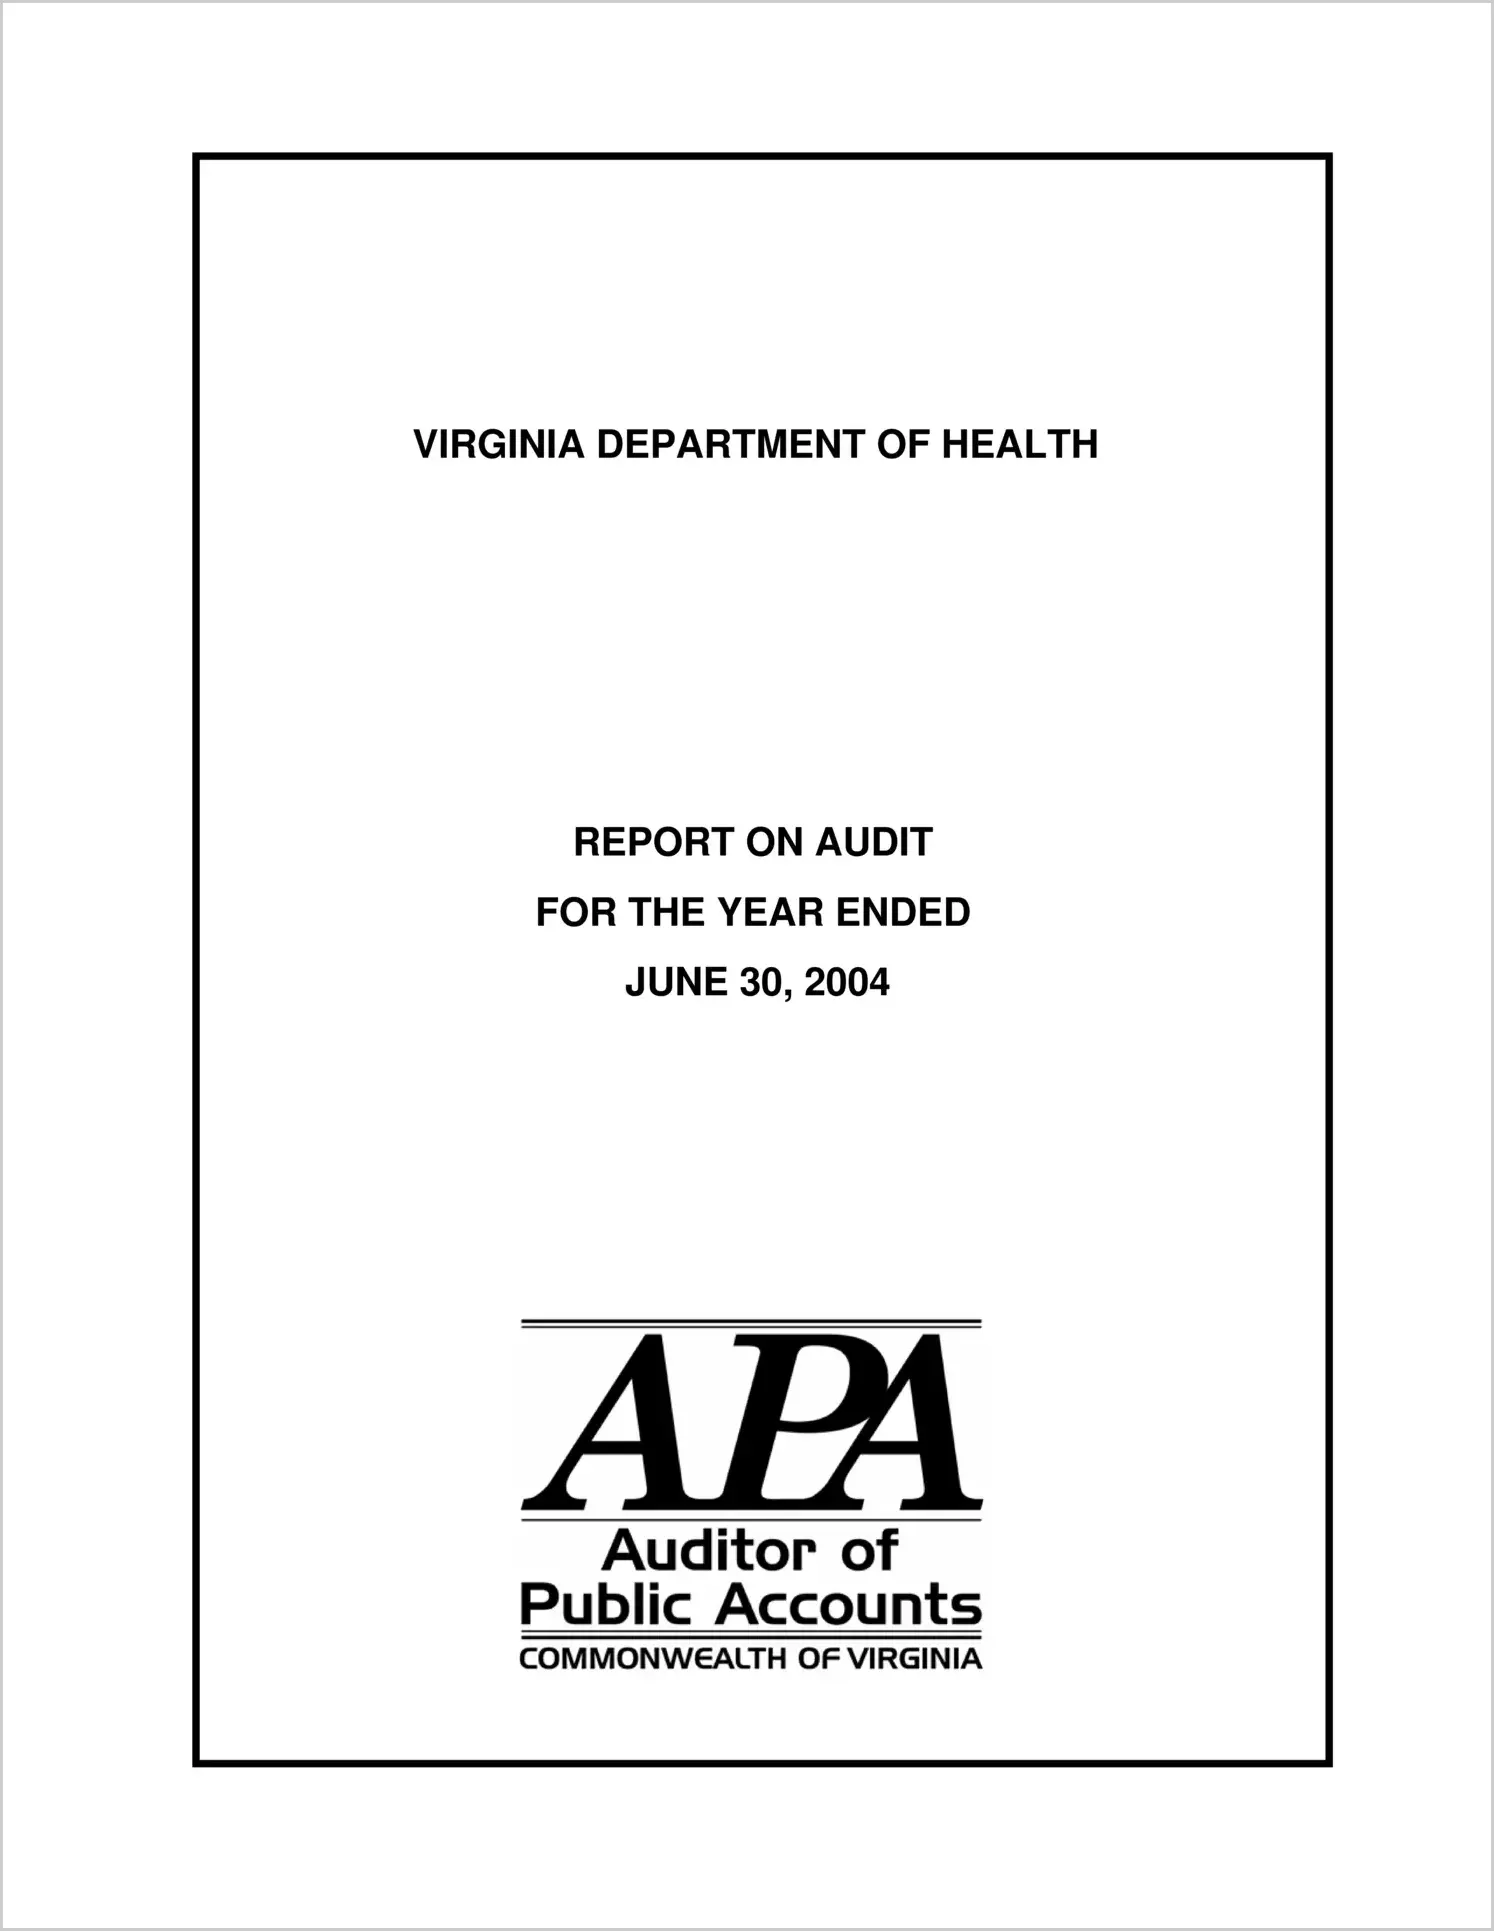 Department of Health for the year ended June 30, 2004